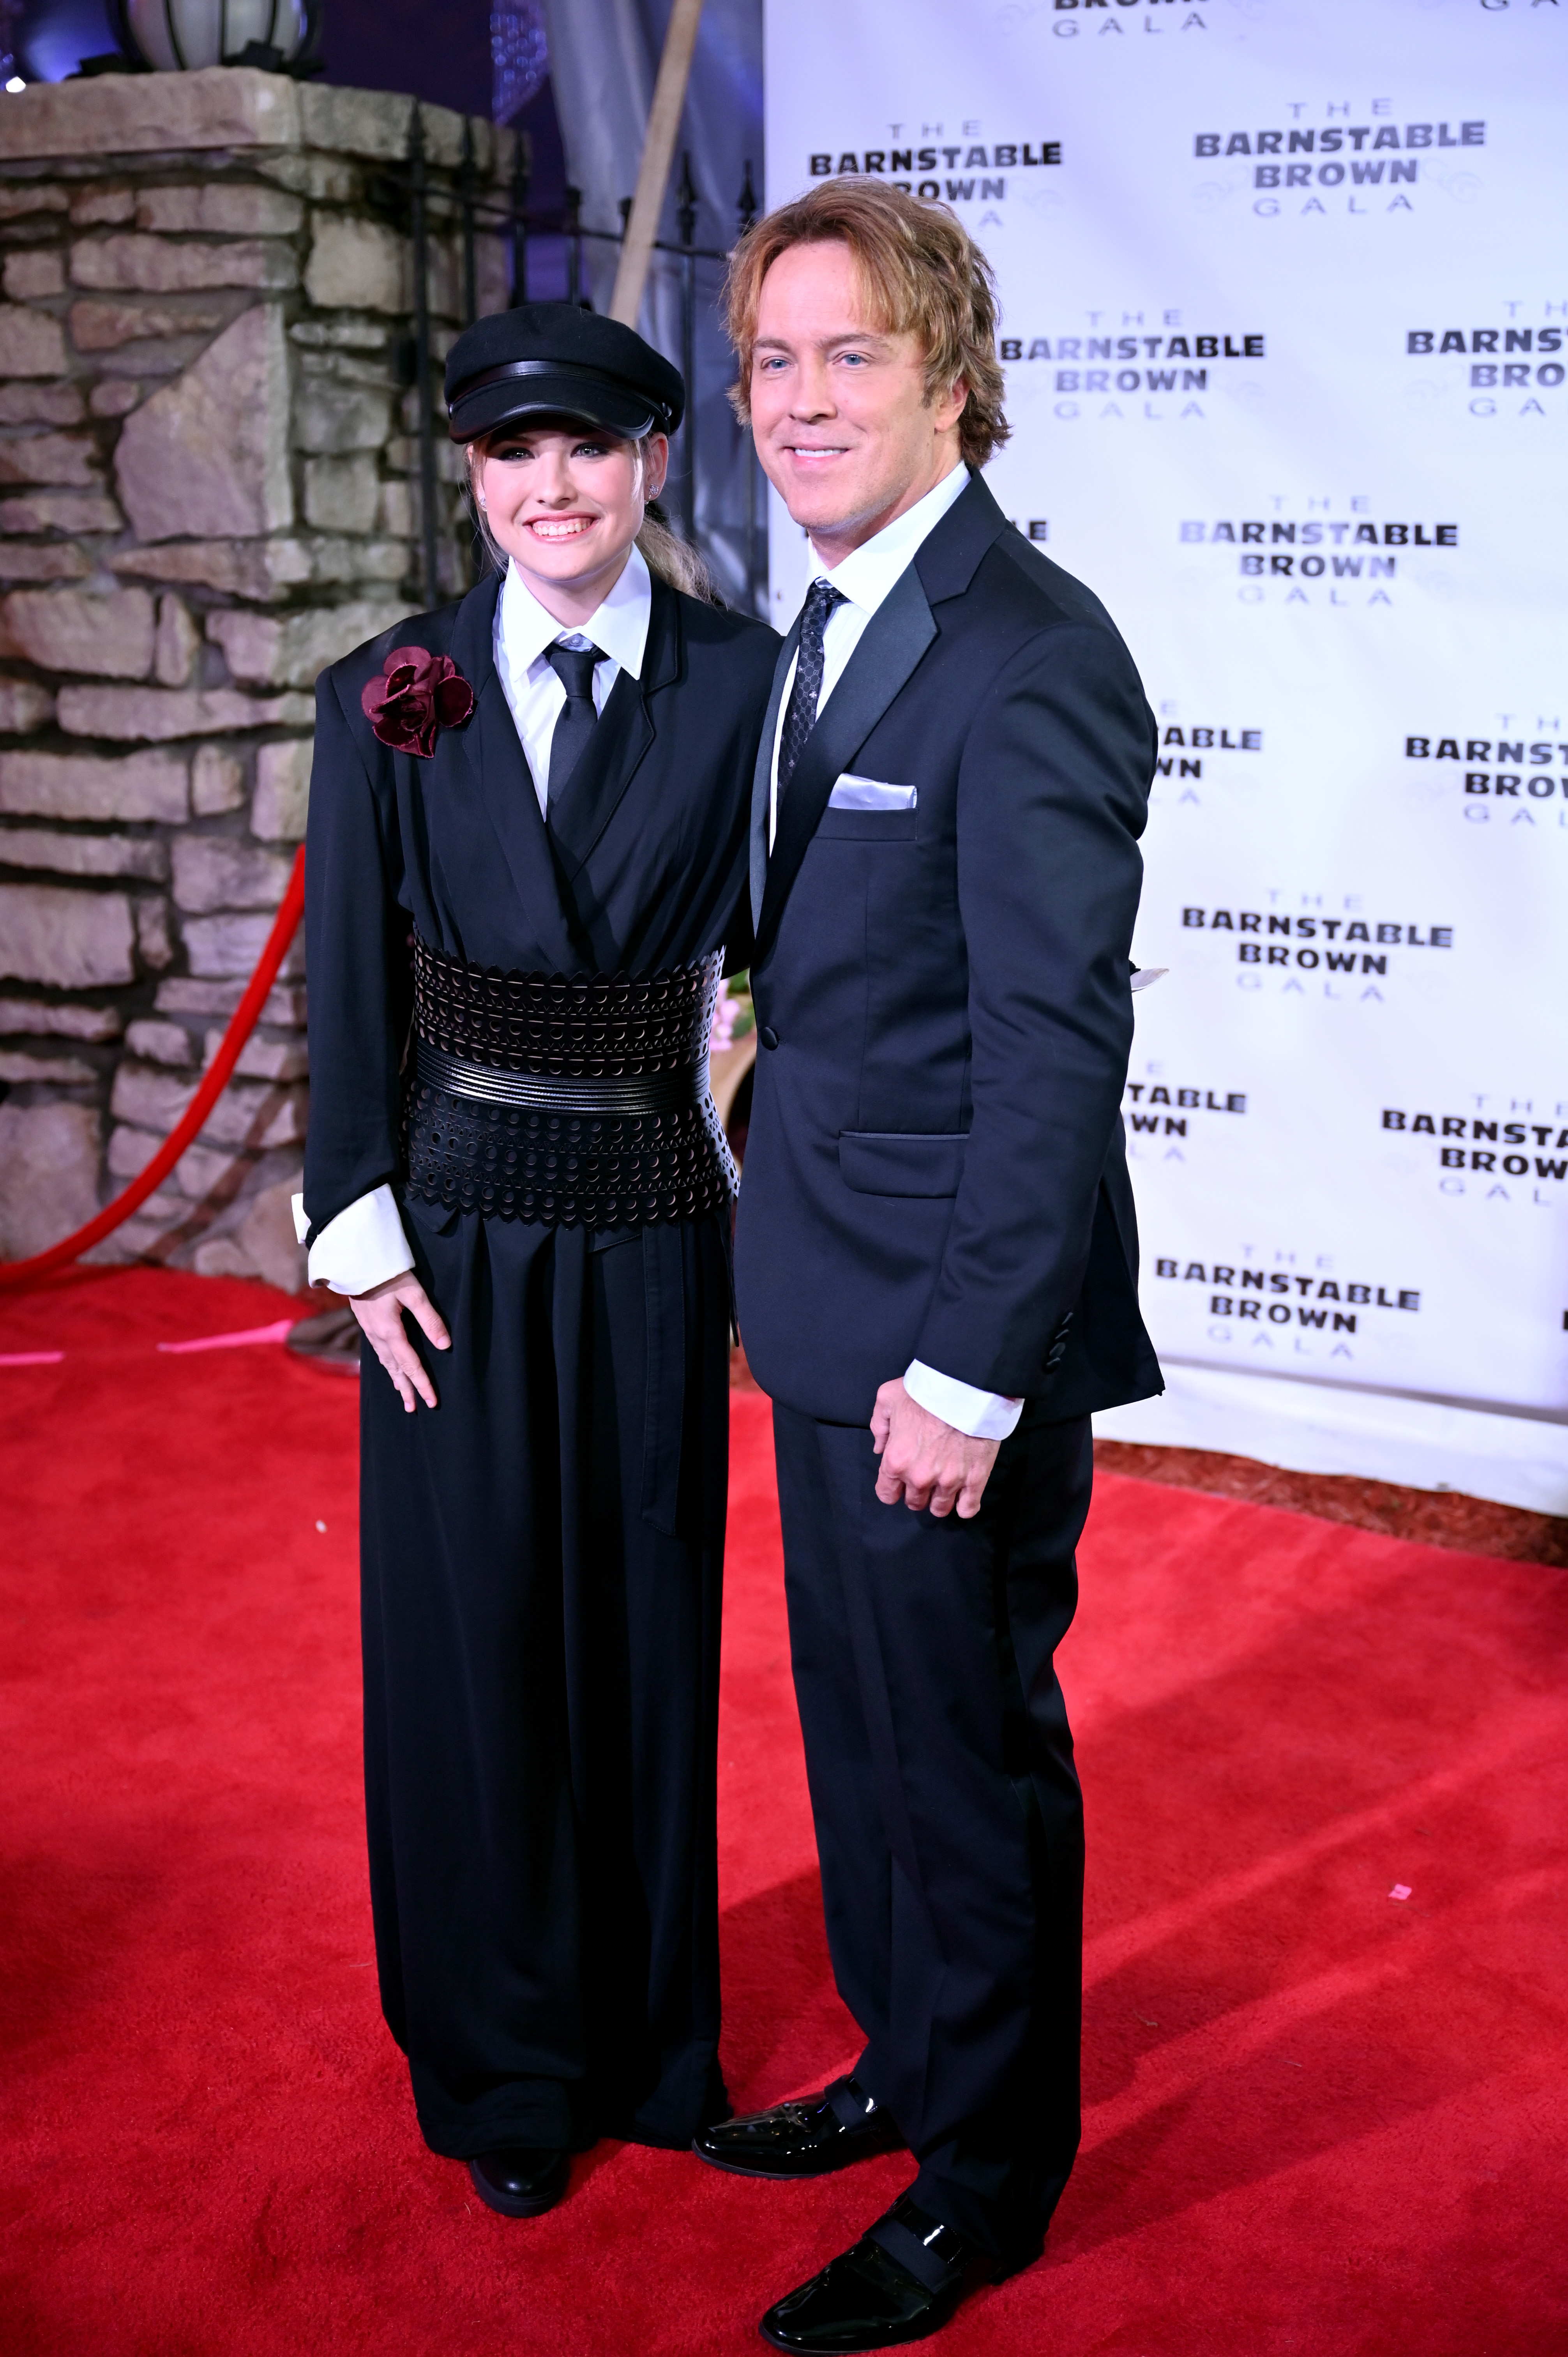 Dannielynn and Larry Birkhead at the 148th Kentucky Derby Barnstable Brown Gala in Louisville, Kentucky on May 6, 2022 | Source: Getty Images